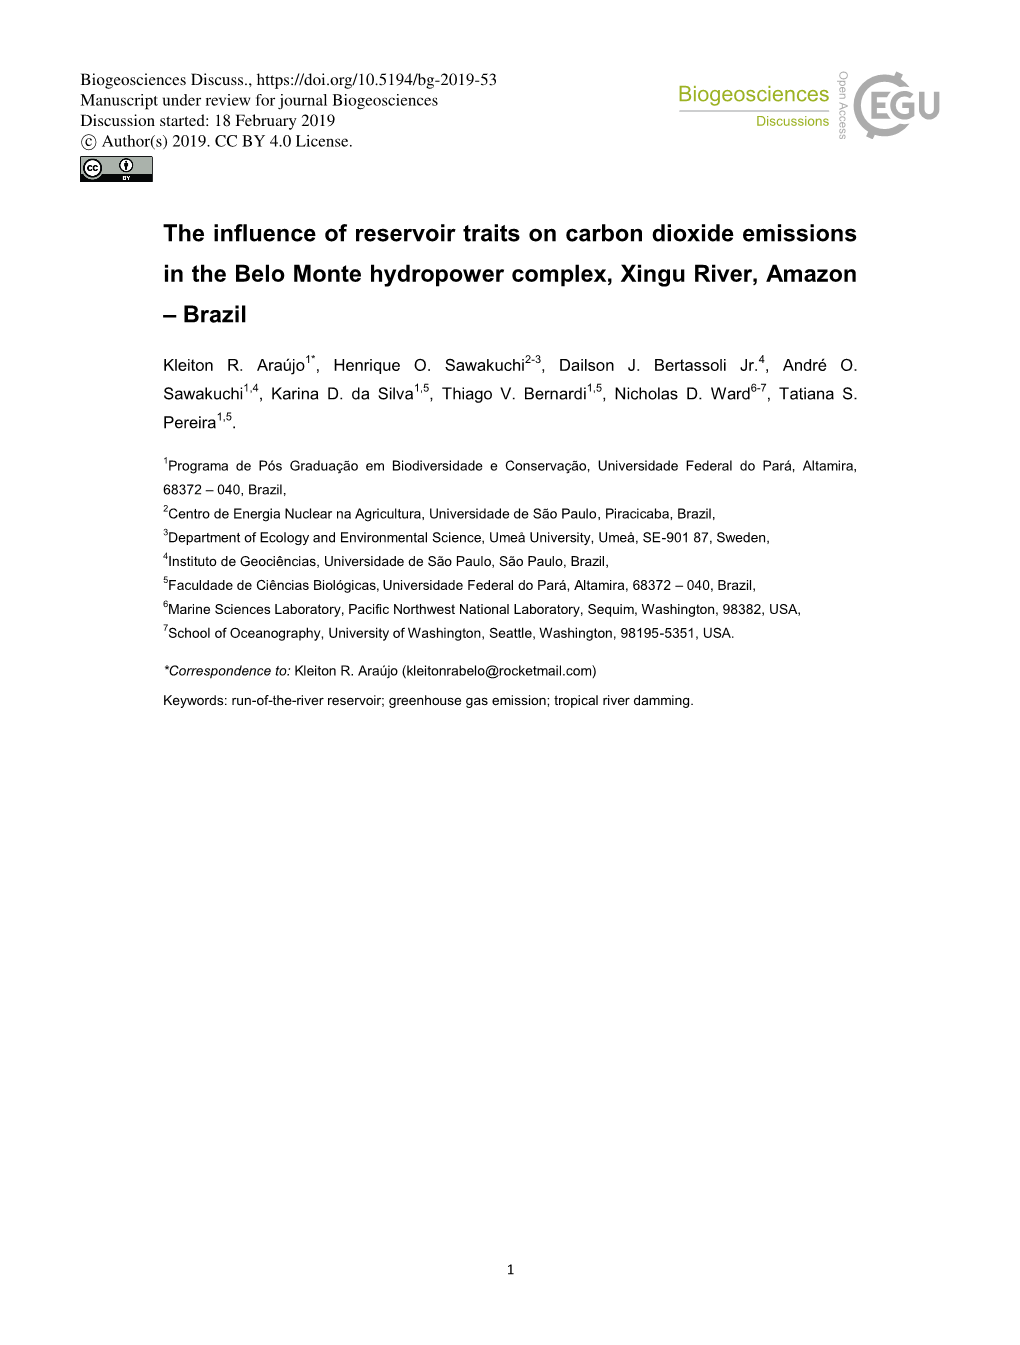 The Influence of Reservoir Traits on Carbon Dioxide Emissions in the Belo Monte Hydropower Complex, Xingu River, Amazon – Brazil